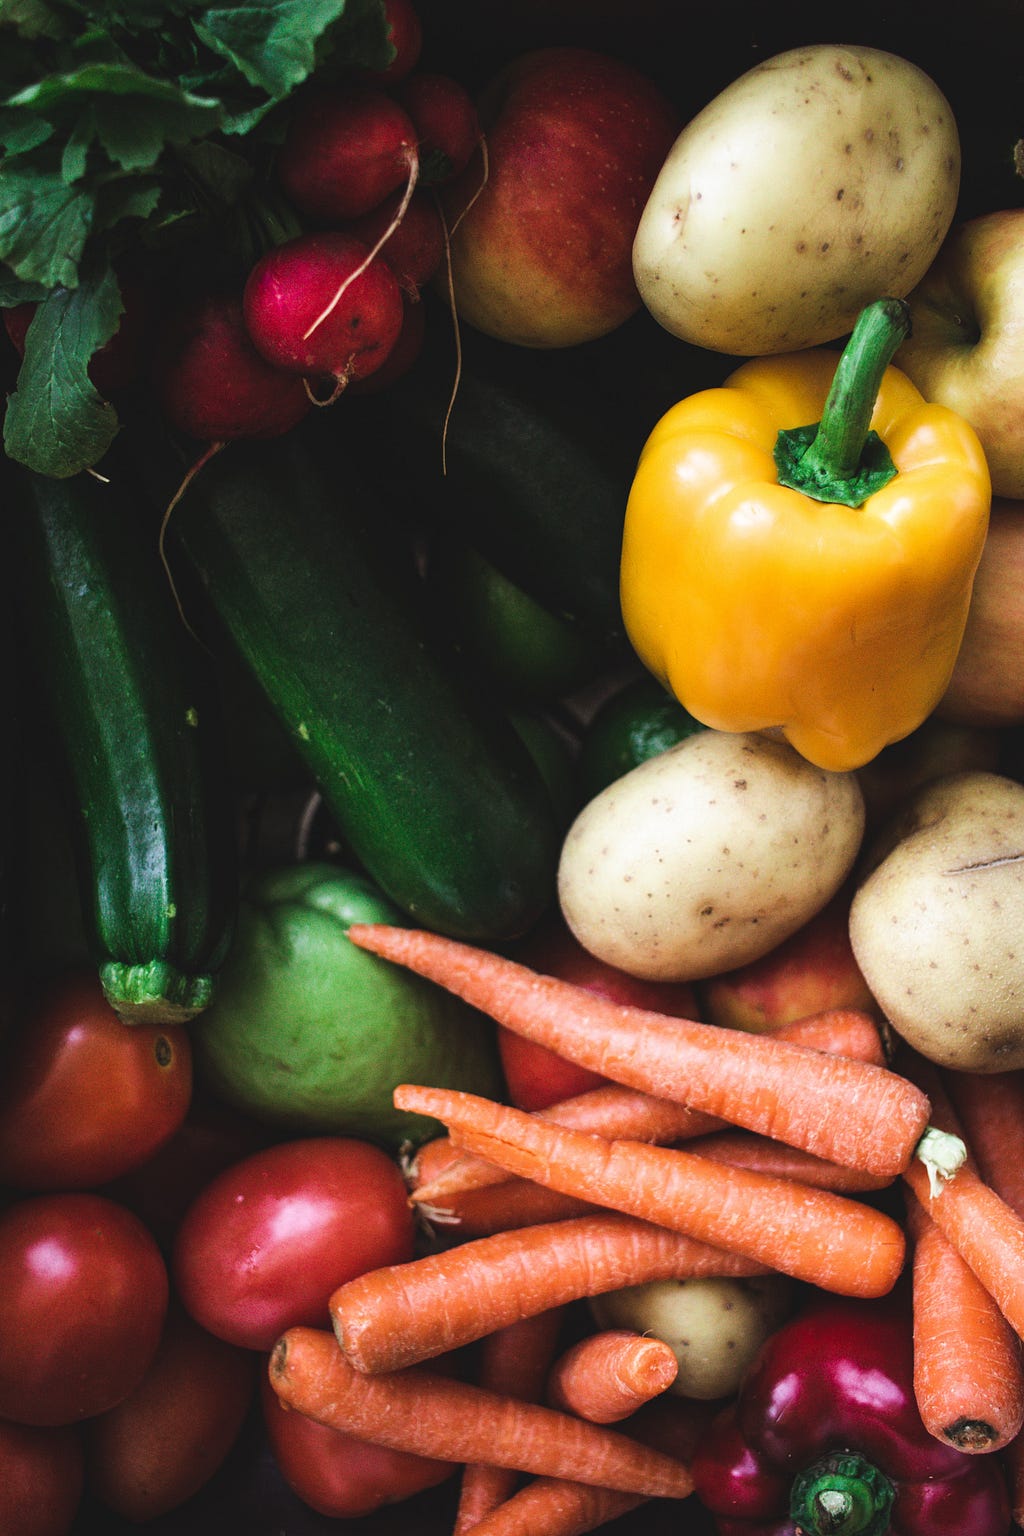 According to experts, a “Planetary Health Diet” should be plant-based (Photo by Marisol Casben, Unsplash Licence)